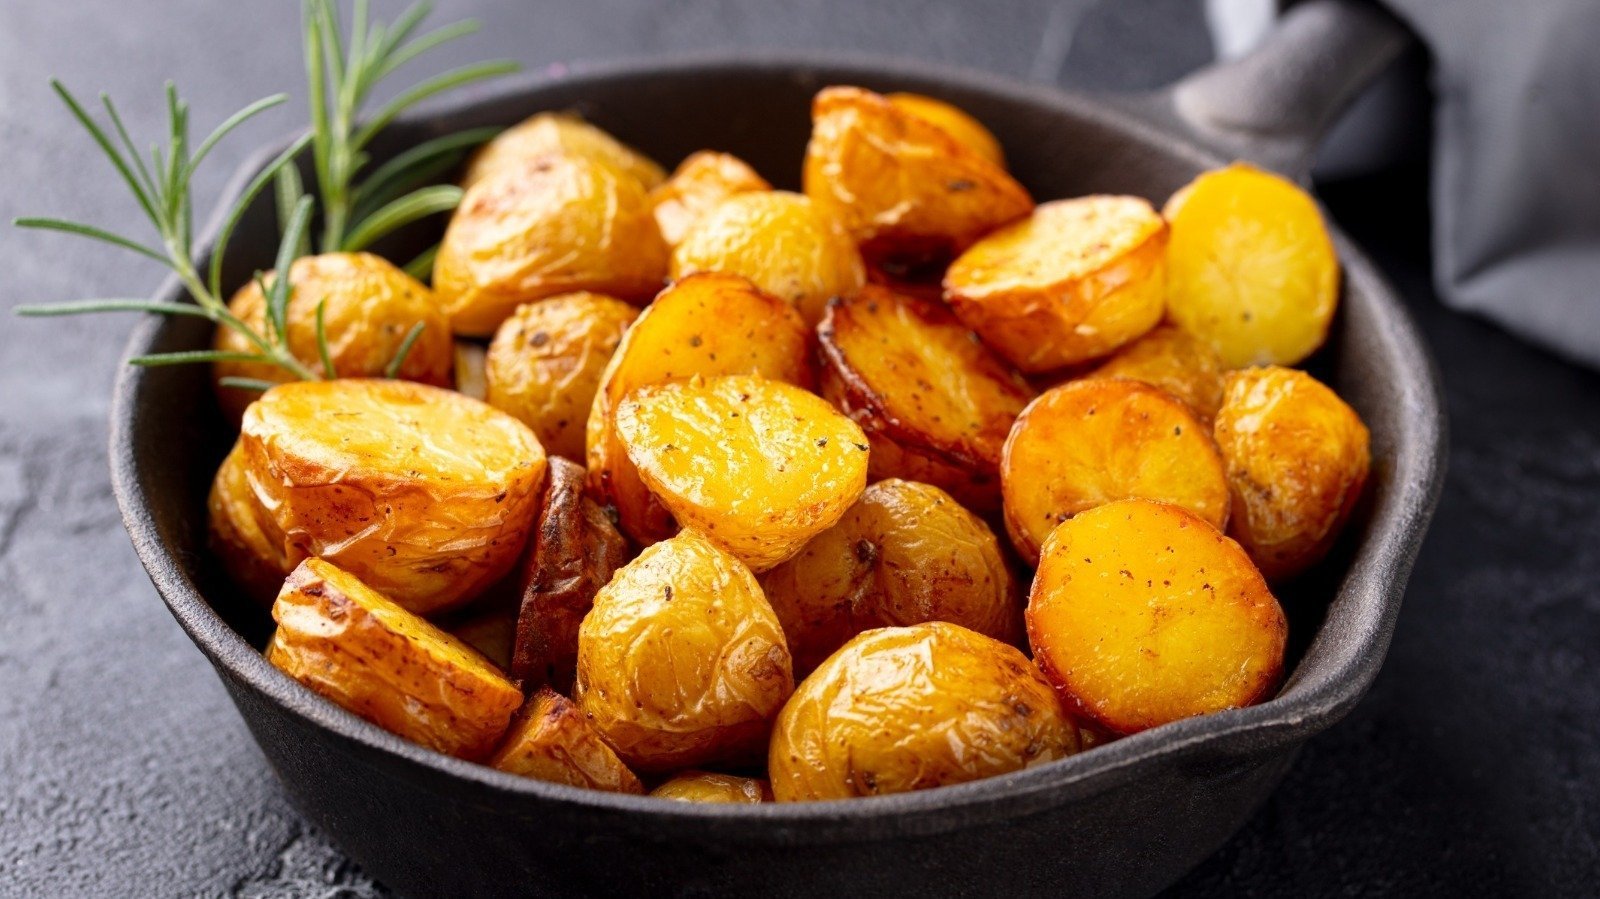 Don't Skip This Step When Roasting Potatoes